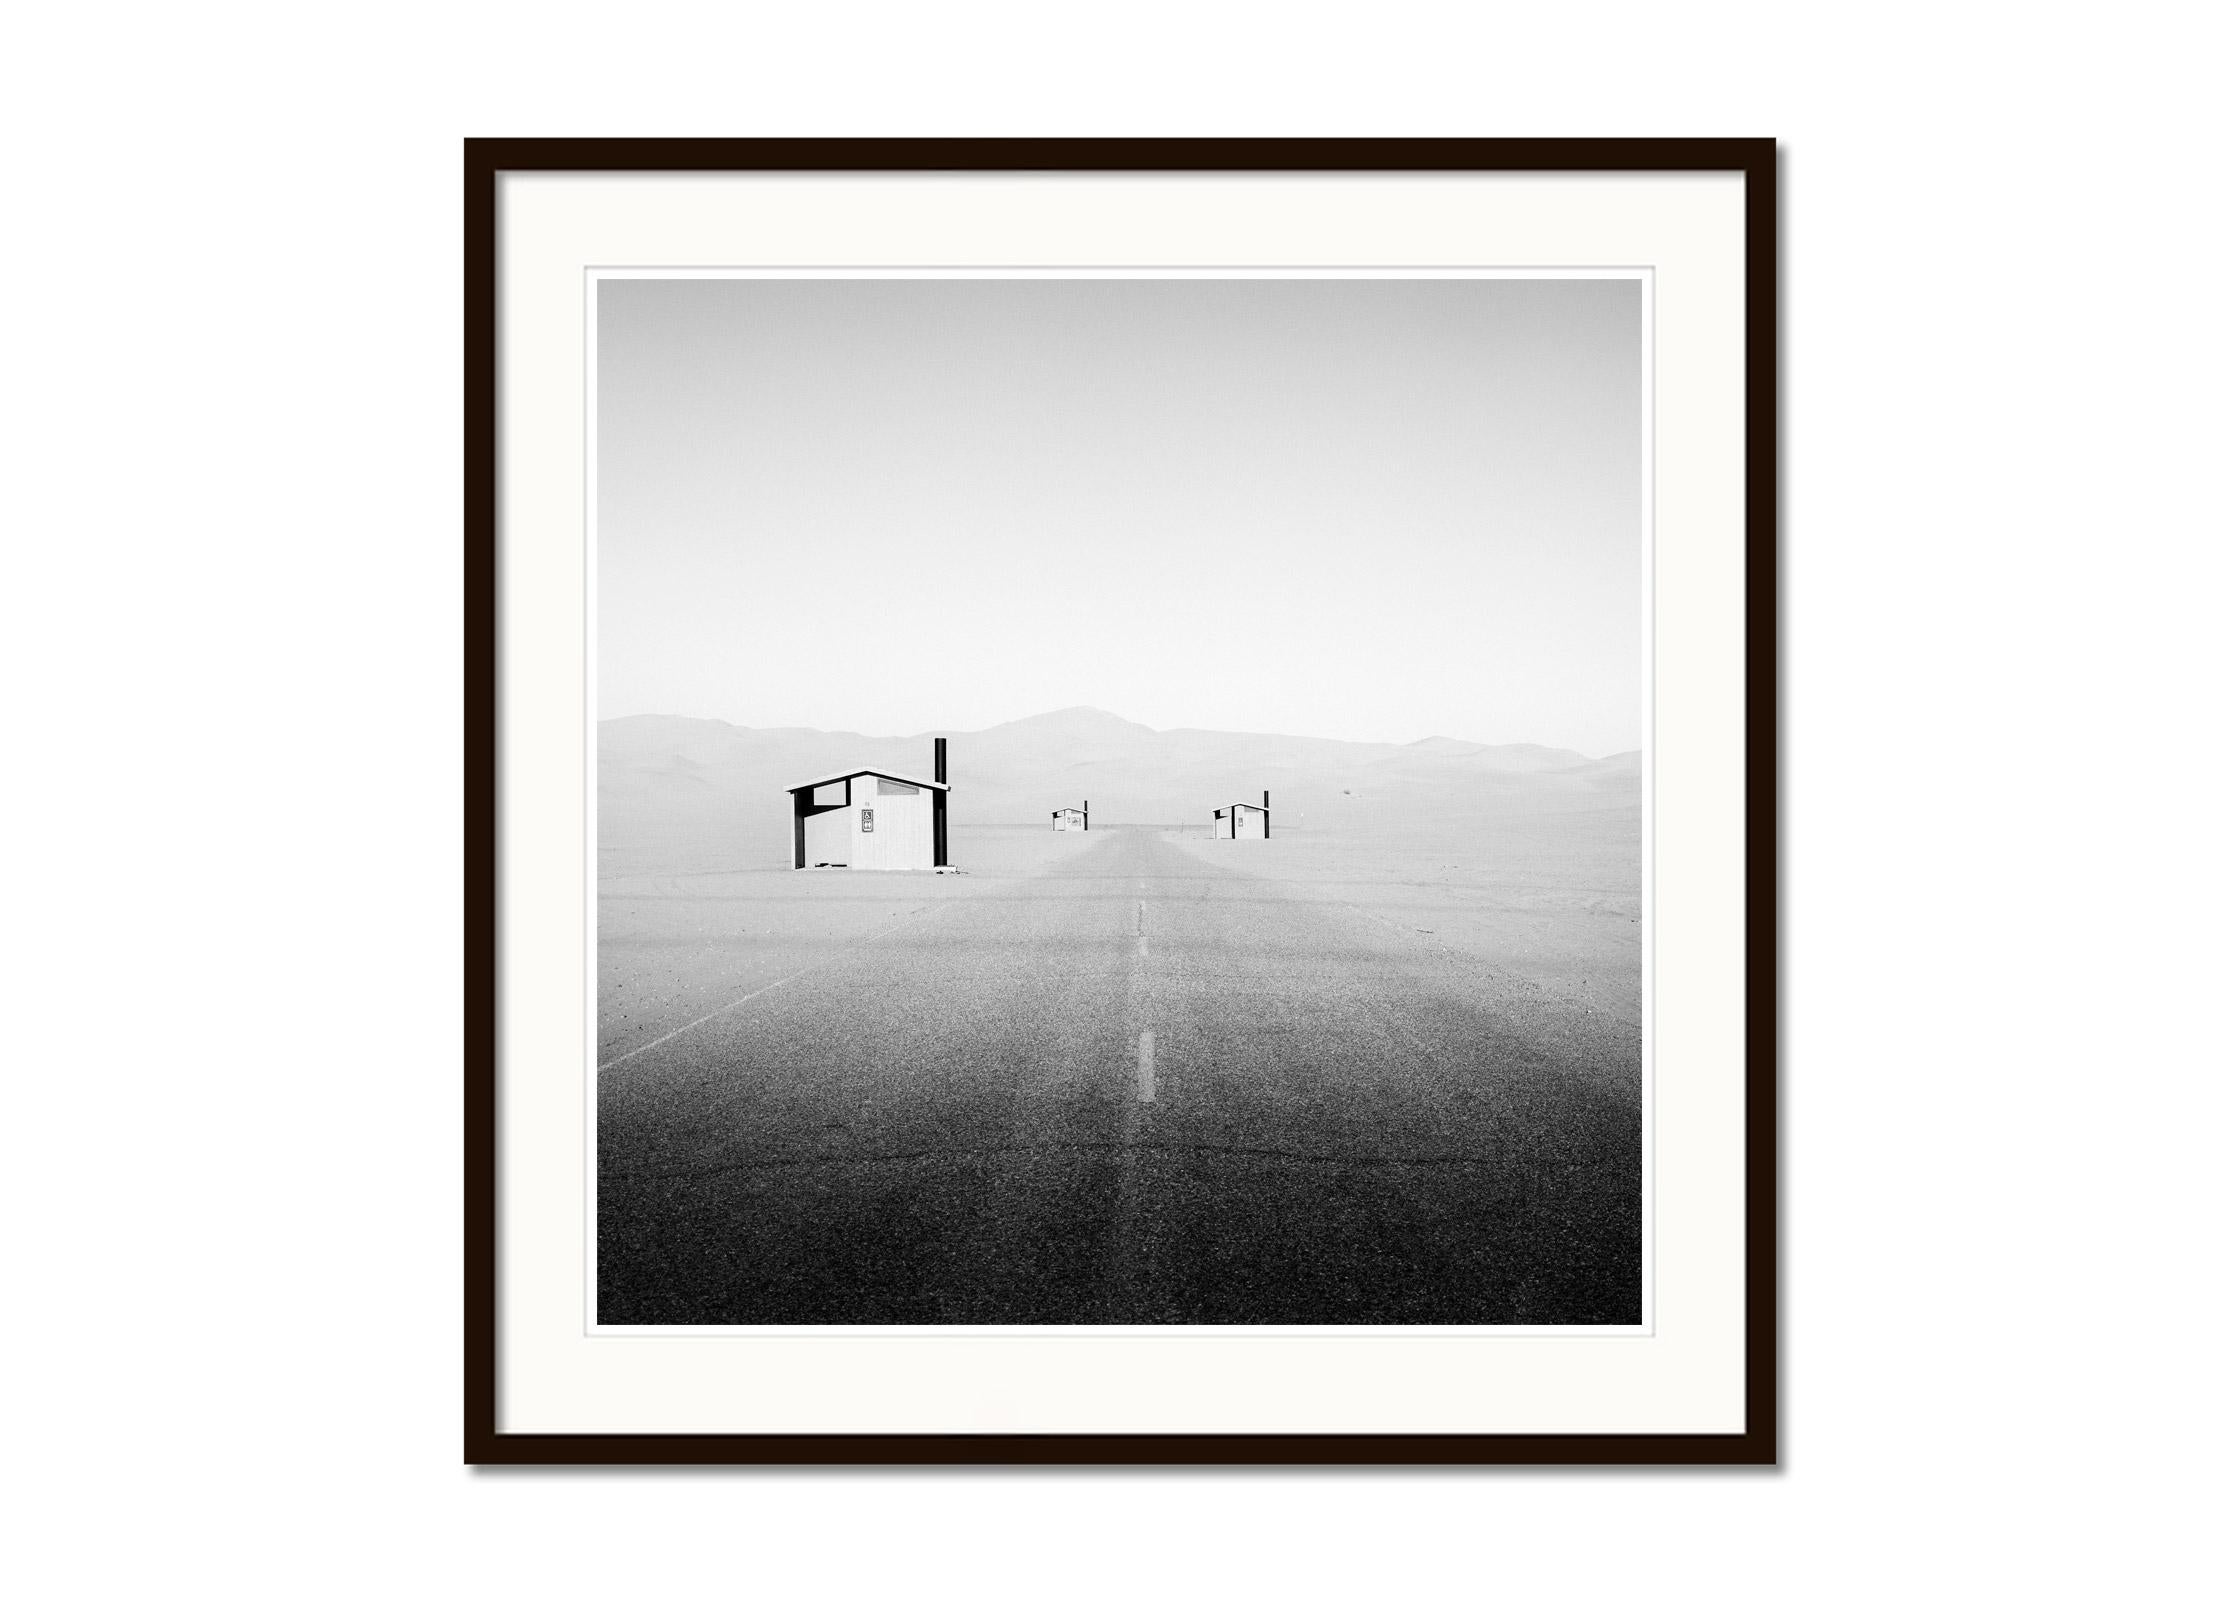 Mexican Border, Camping, Arizona, USA, black and white landscape art photography - Contemporary Photograph by Gerald Berghammer